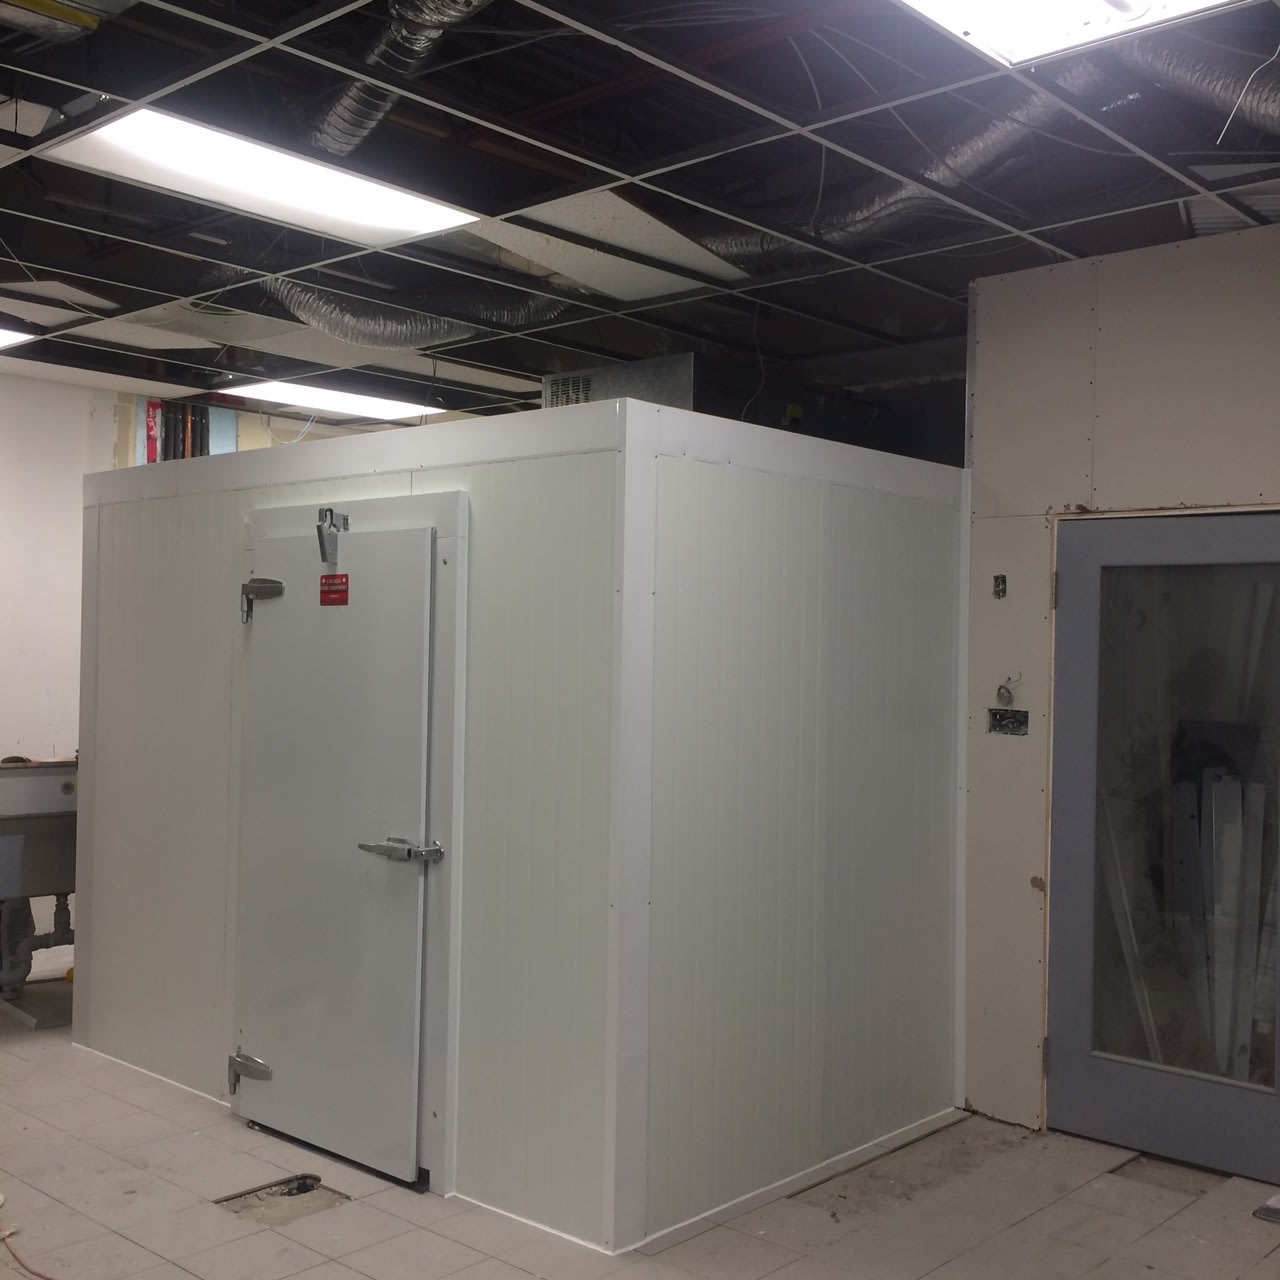 8x10x8H Walk-In Freezer - Self Contained (ALL USED) - F8108USC